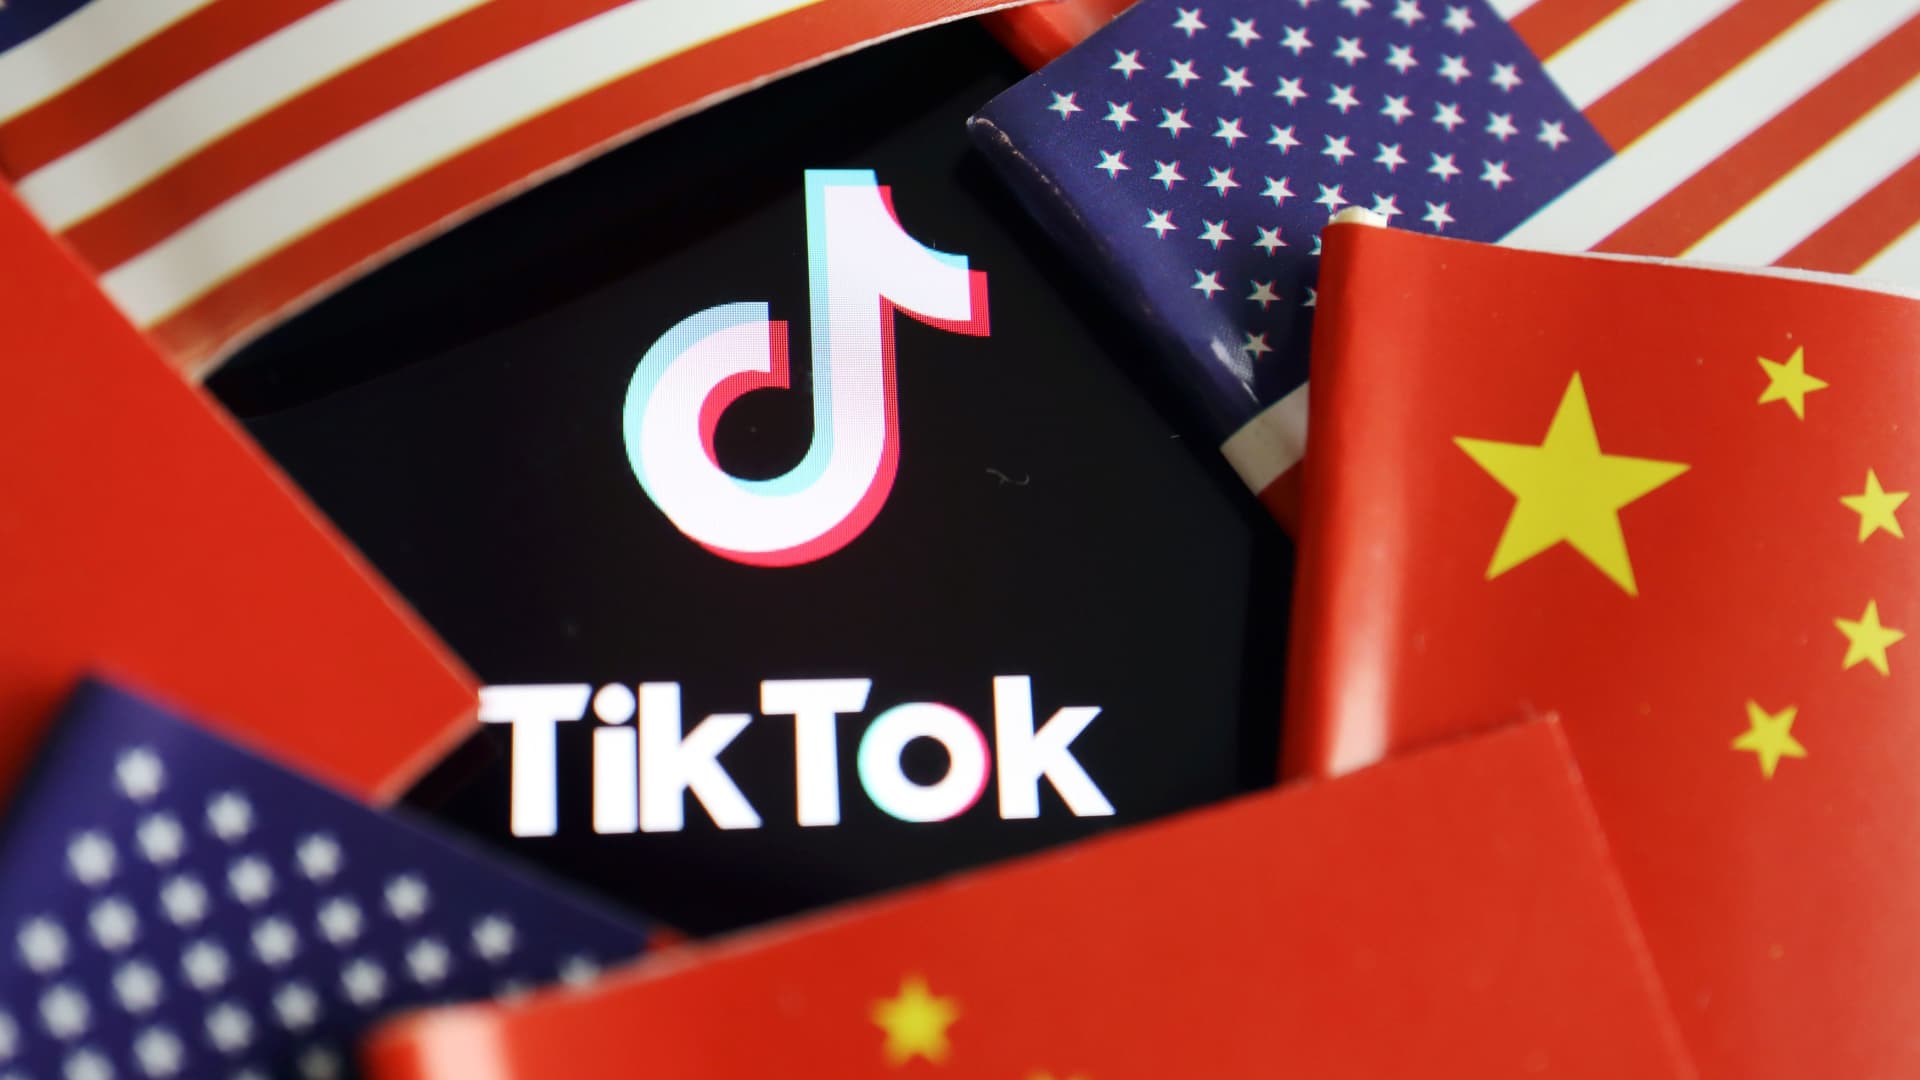 TikTok wants to distance from China but the government’s getting involved